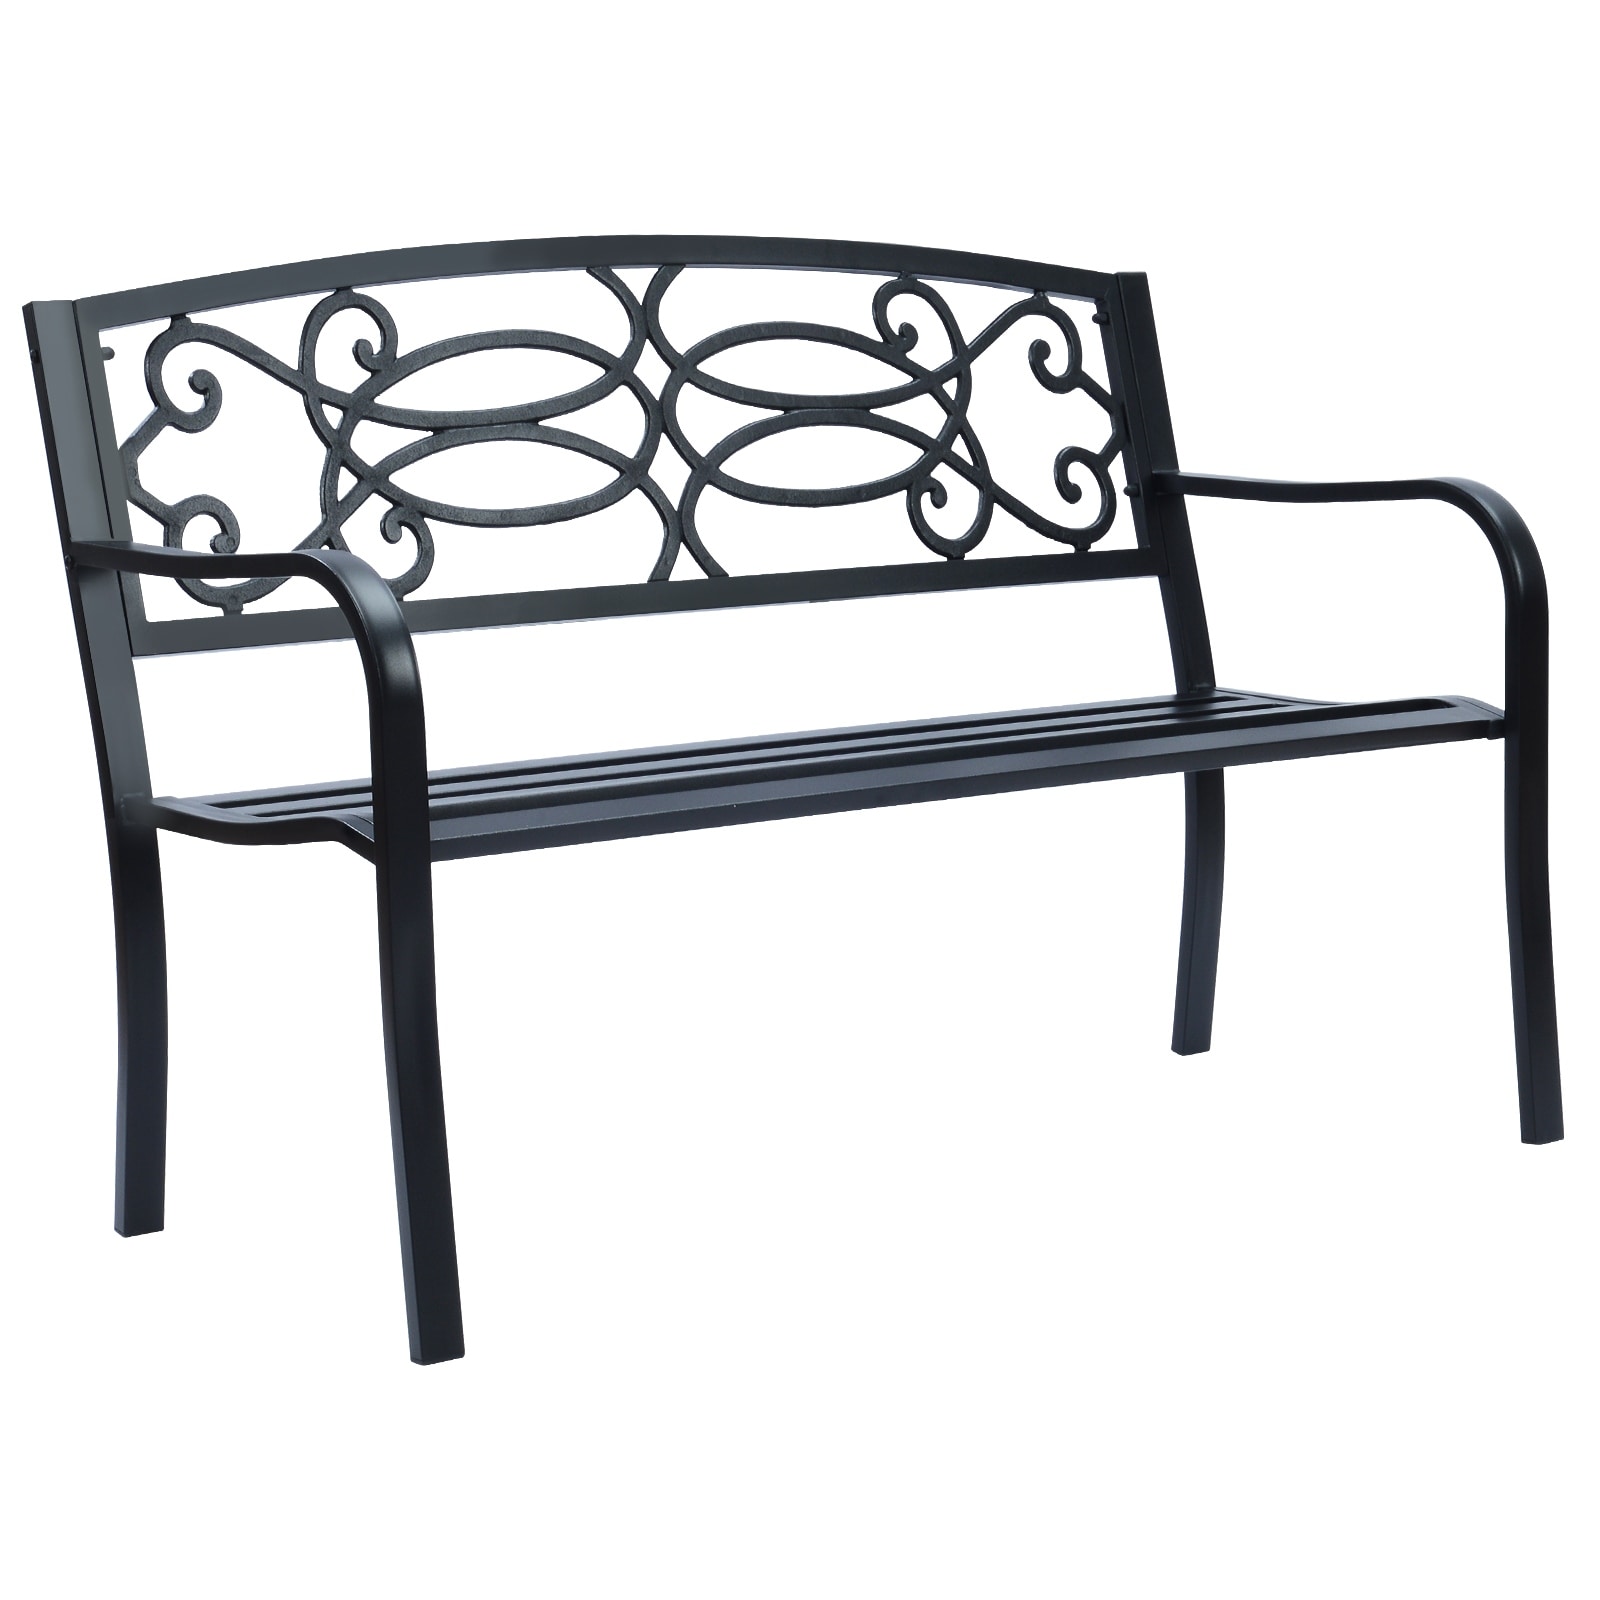 & - Porch, - Patio by Garden, Bench, Park Marion On Beyond Bed Outdoor - 33564601 Metal Deck for Sun-Ray Sale Bench Lawn, Black in N/A Bath -